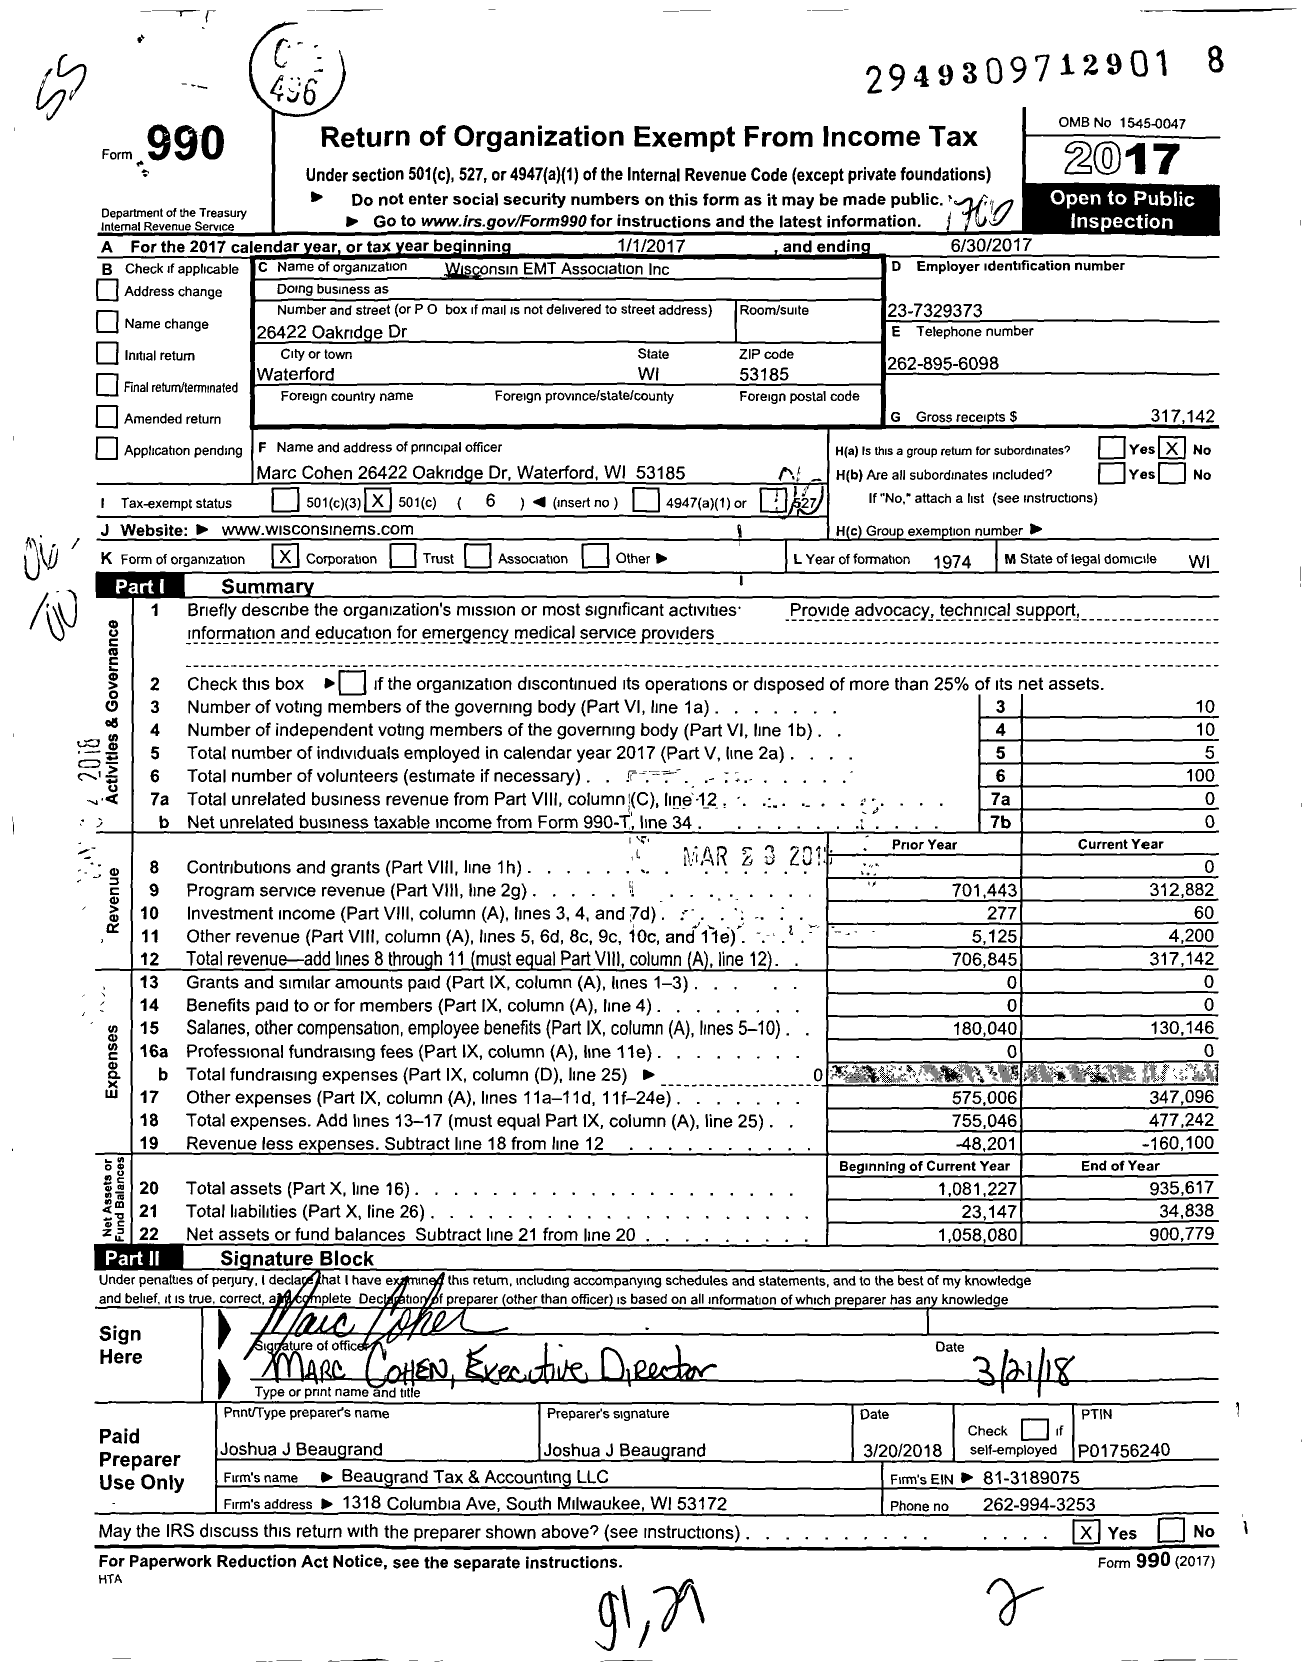 Image of first page of 2016 Form 990O for Wisconsin EMT Association